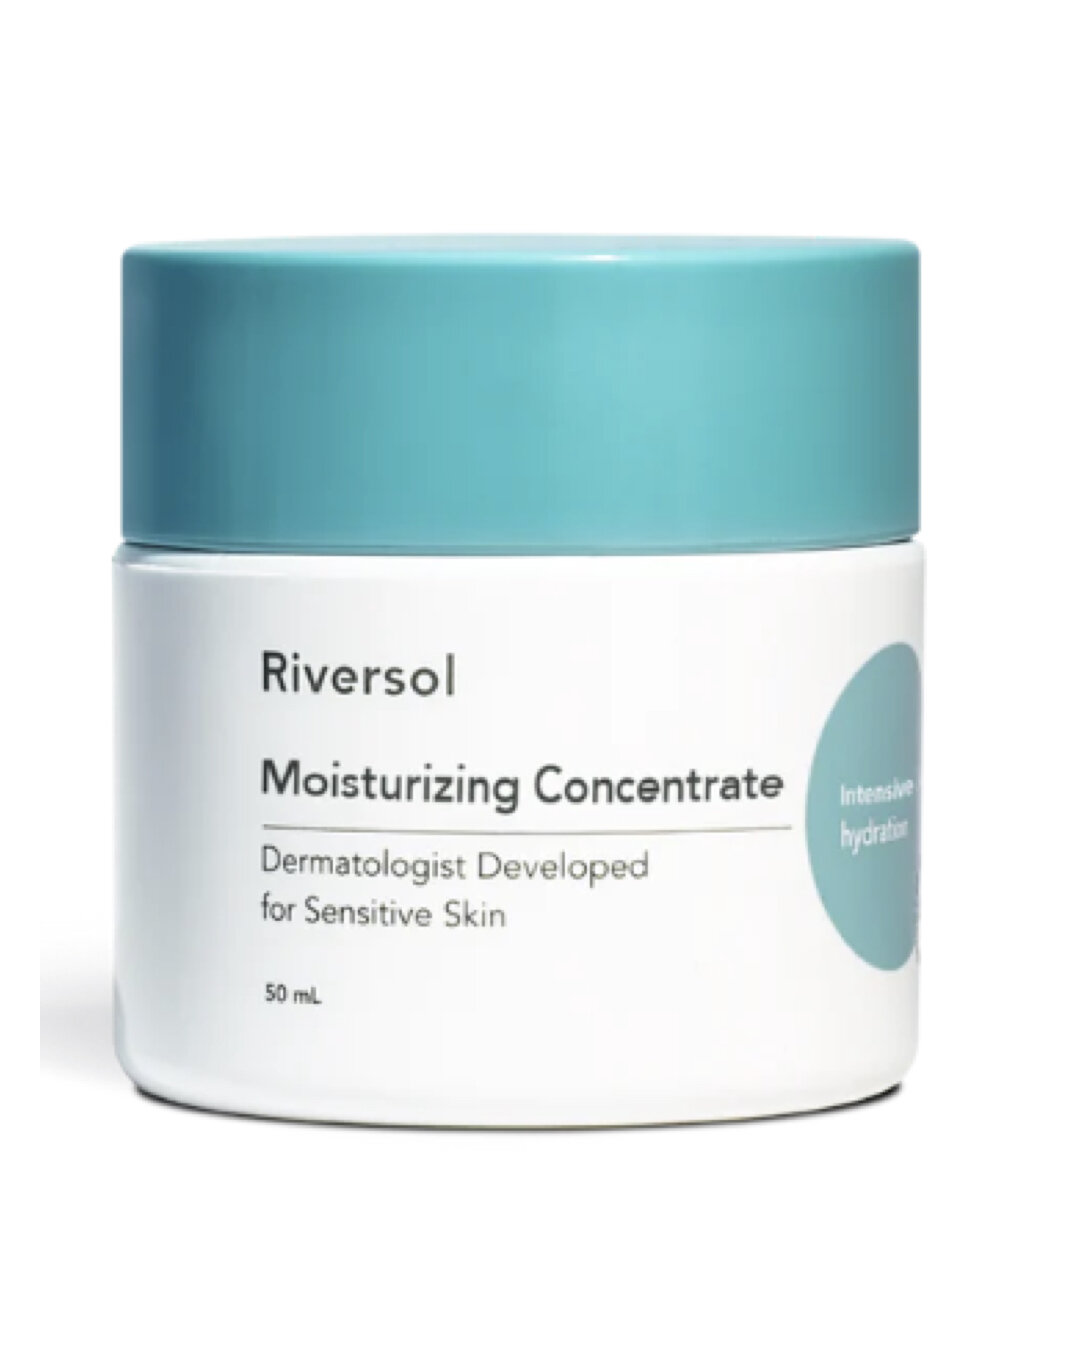 Moisturizing Concentrate